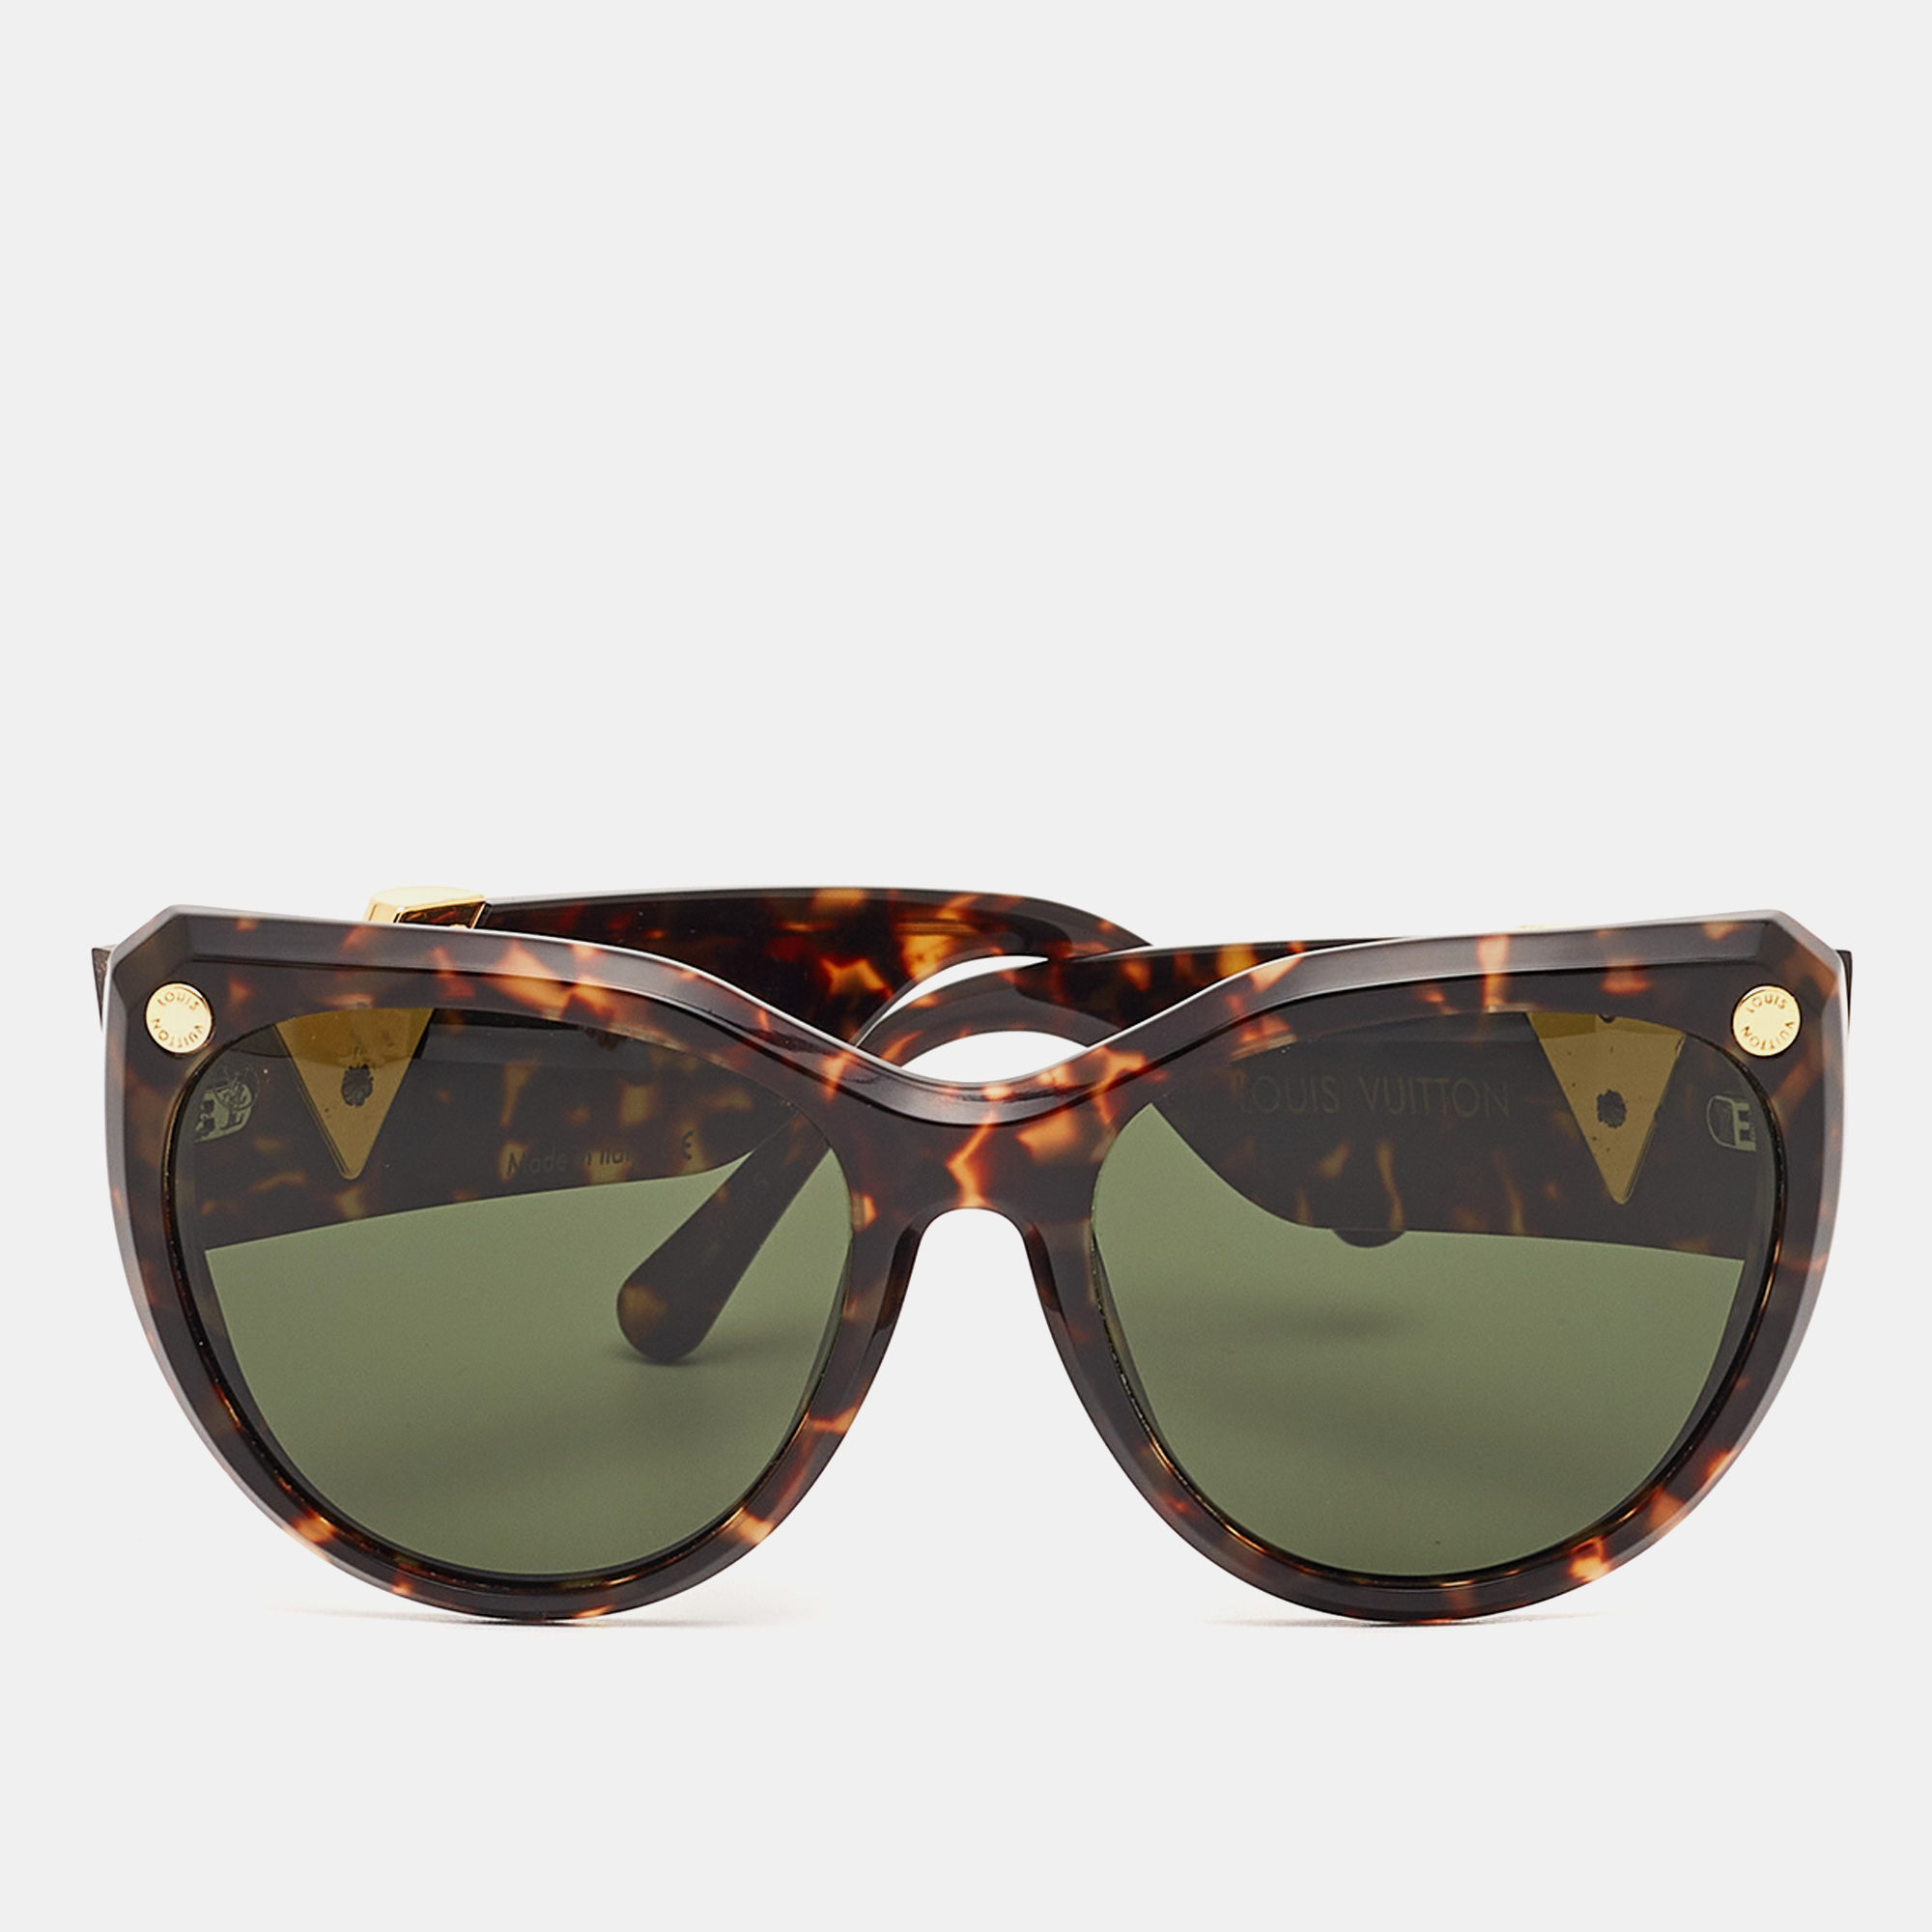 Elevate your eyewear game with these Louis Vuitton brown sunglasses. Meticulously crafted from premium materials they offer unparalleled UV protection and a timeless design making them a must have accessory for the fashion forward.